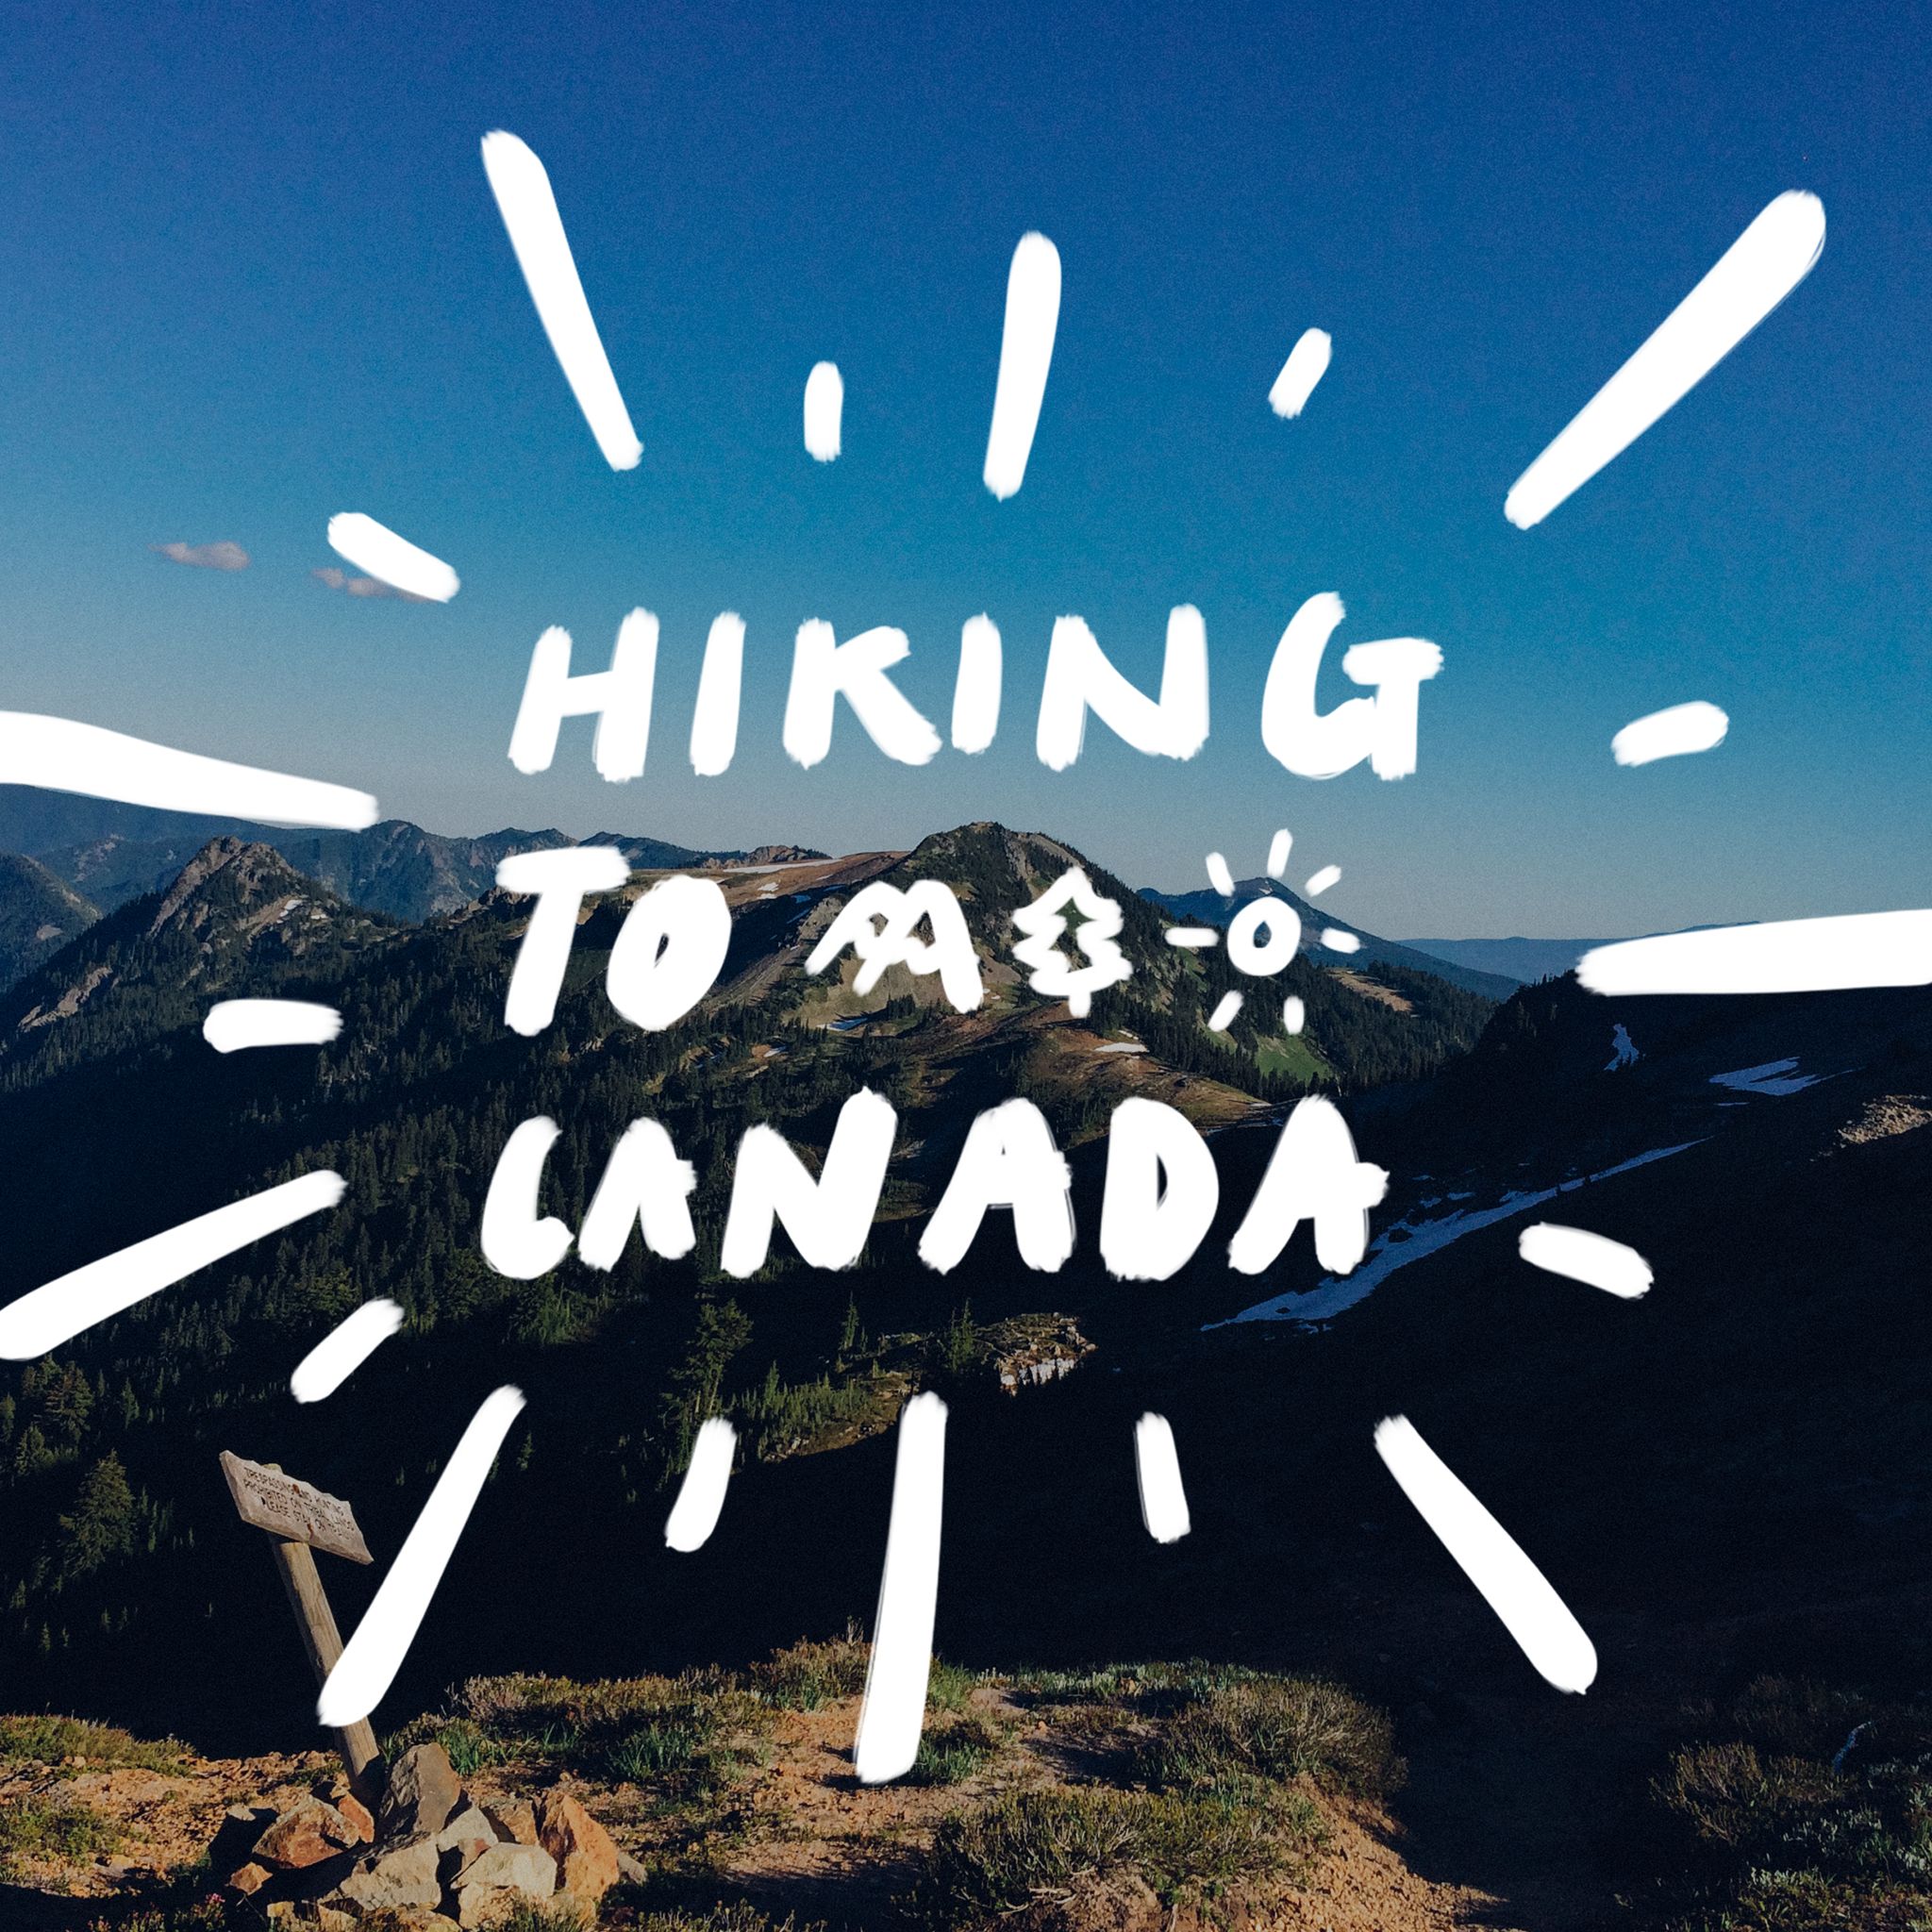 Hiking to Canada